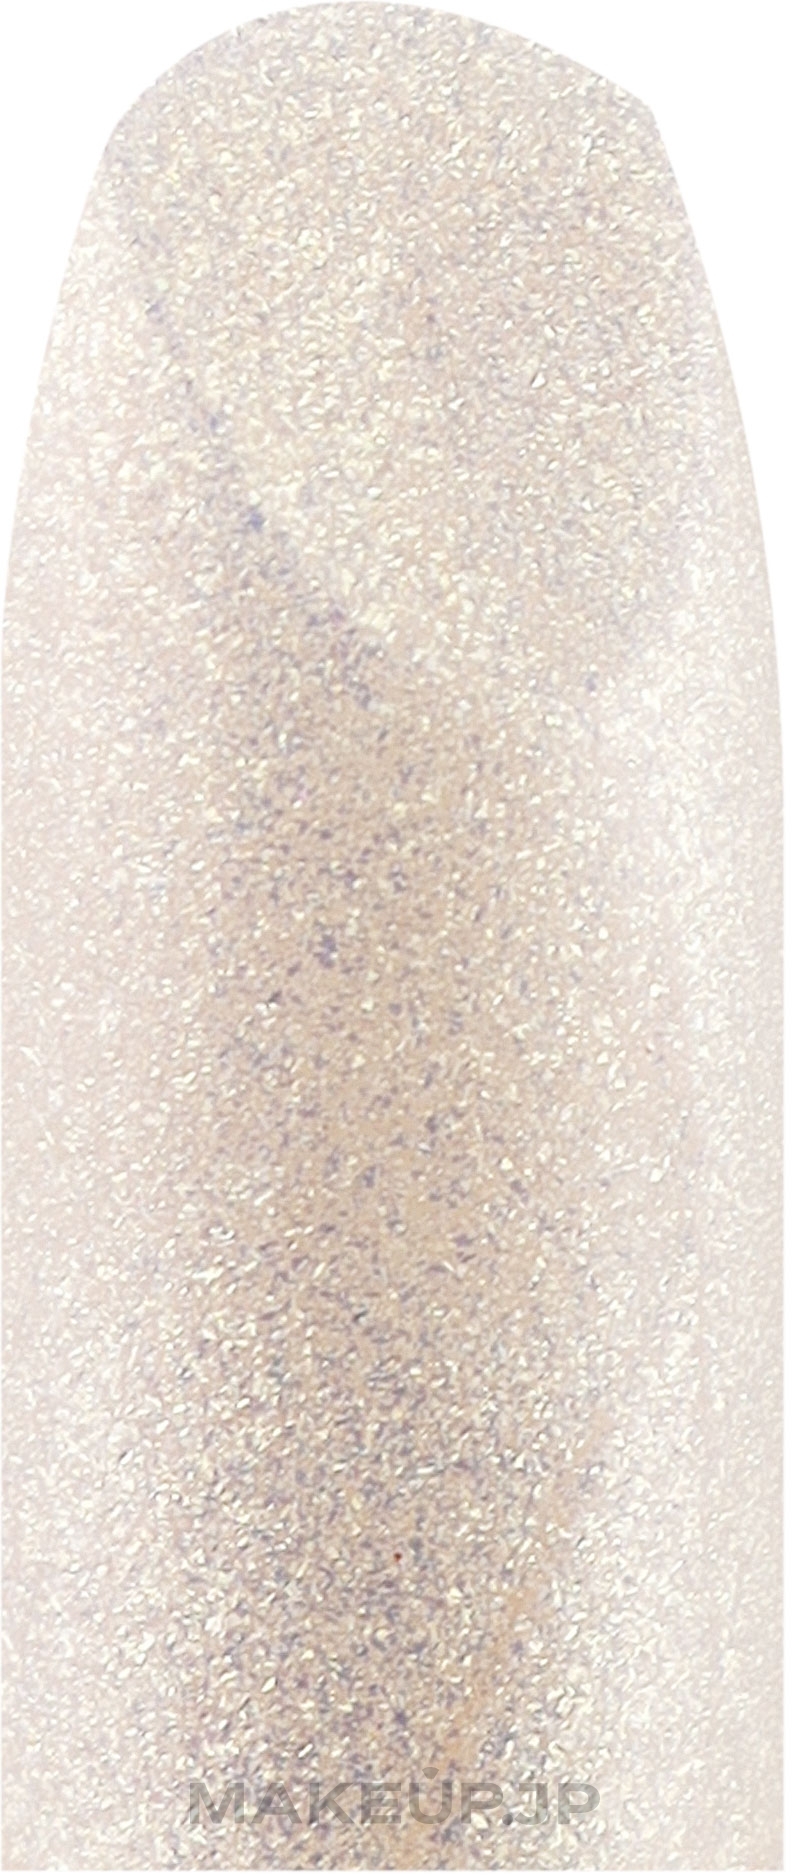 Shimmering Lipstick - Vipera Play-Off Magnetic — photo Gold Sheen